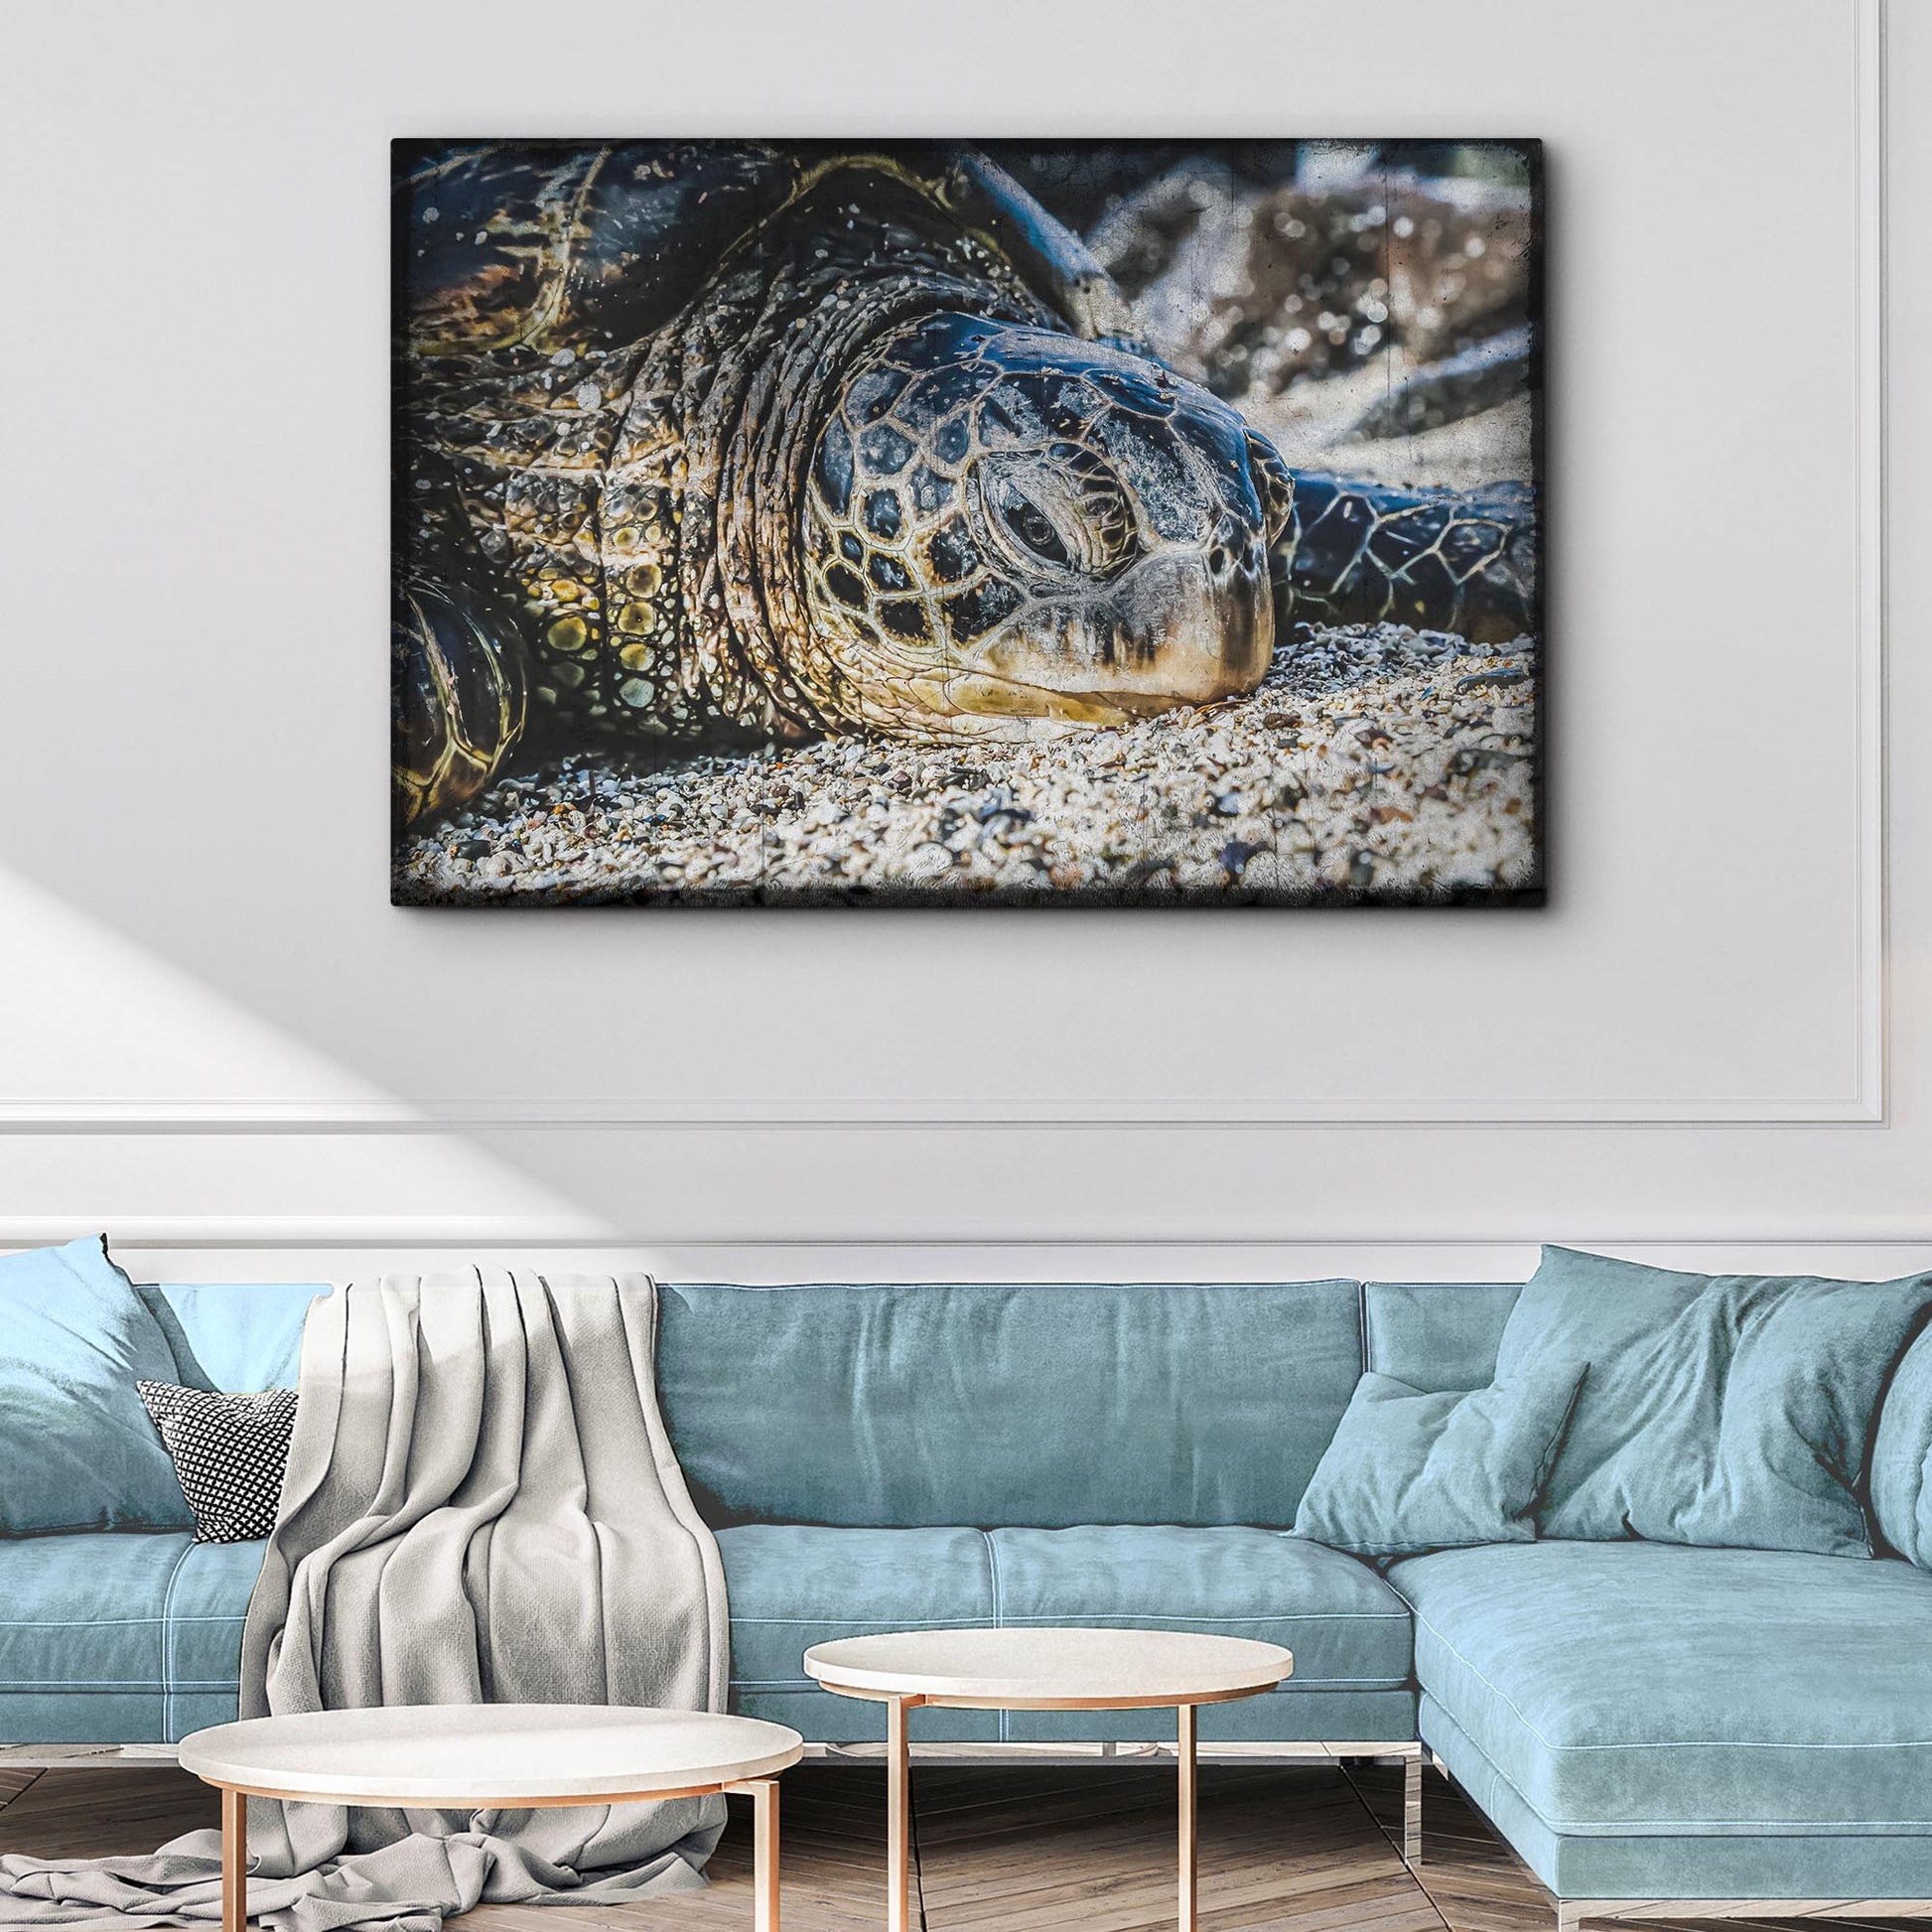 Sea Turtle On The Beach Wall Art - Image by Tailored Canvases